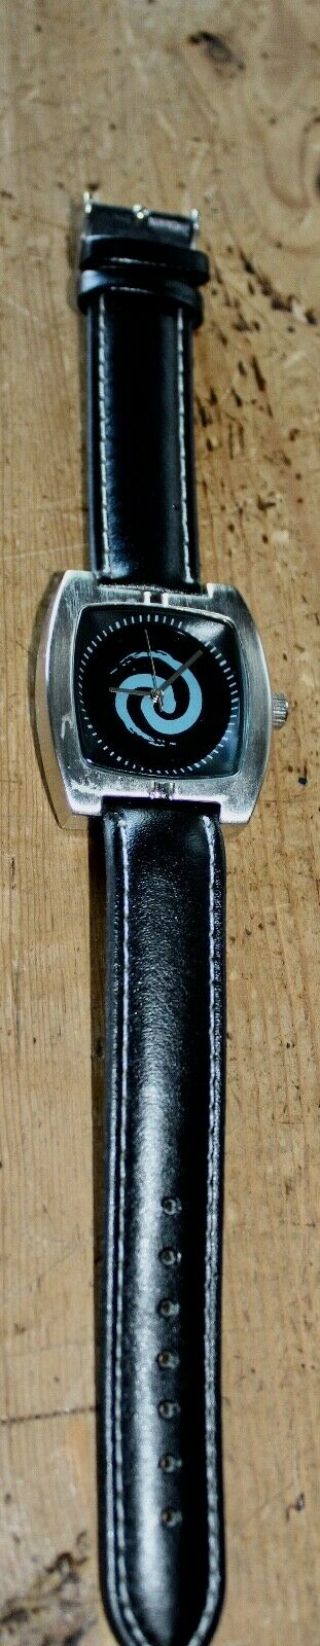 Avatar: The Last Airbender Movie Promo Cast And Crew Gift Wristwatch Watch